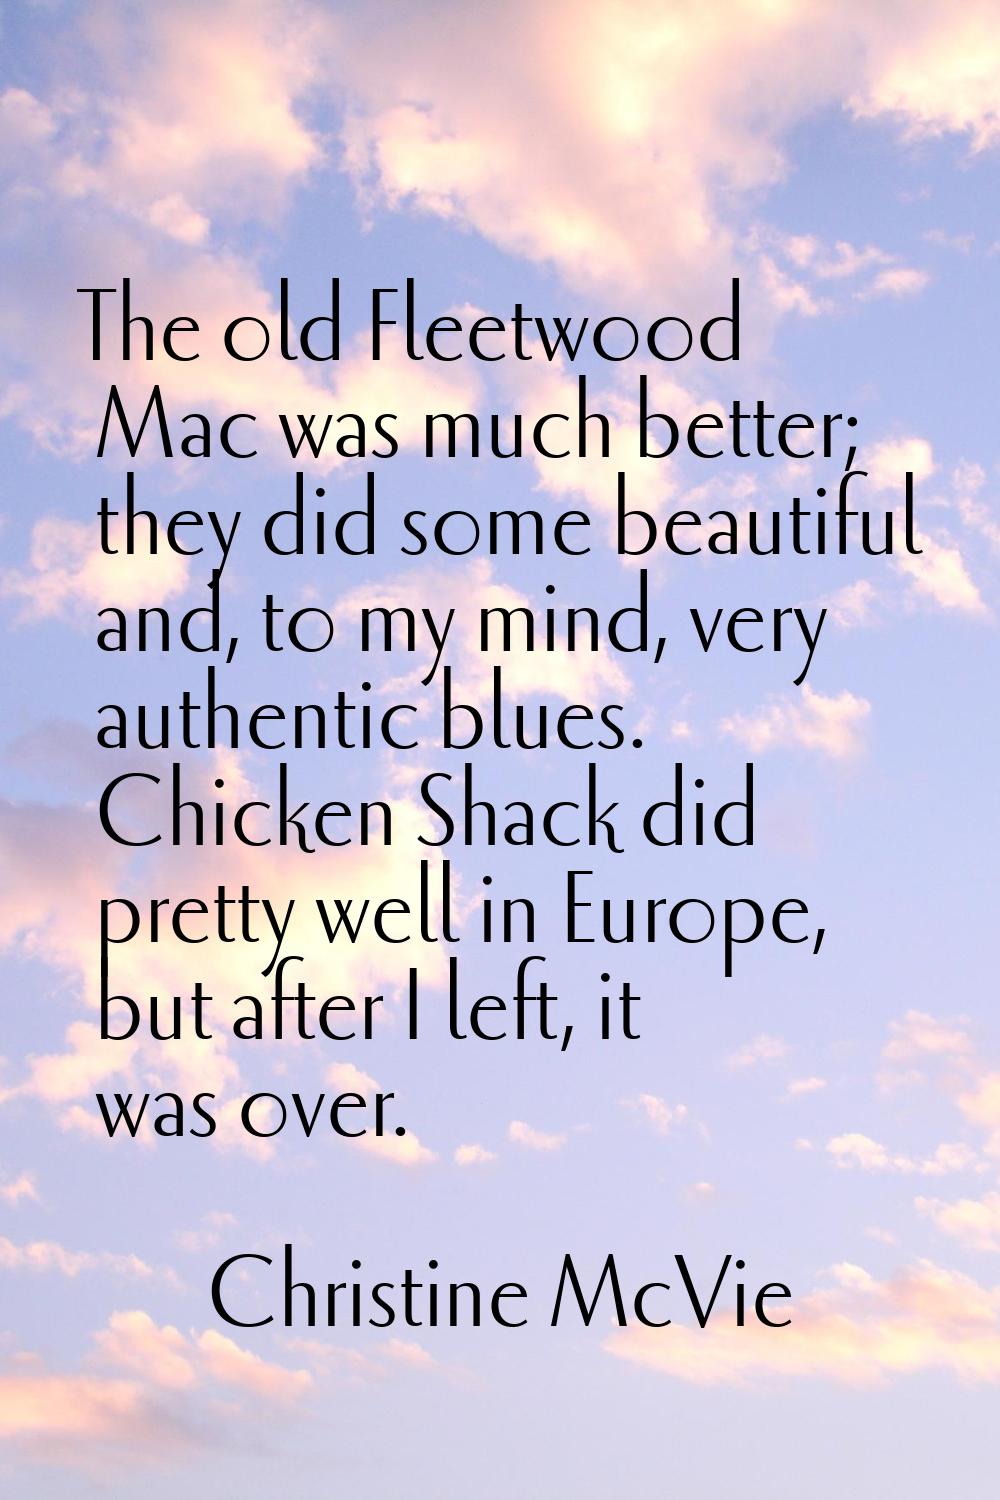 The old Fleetwood Mac was much better; they did some beautiful and, to my mind, very authentic blue